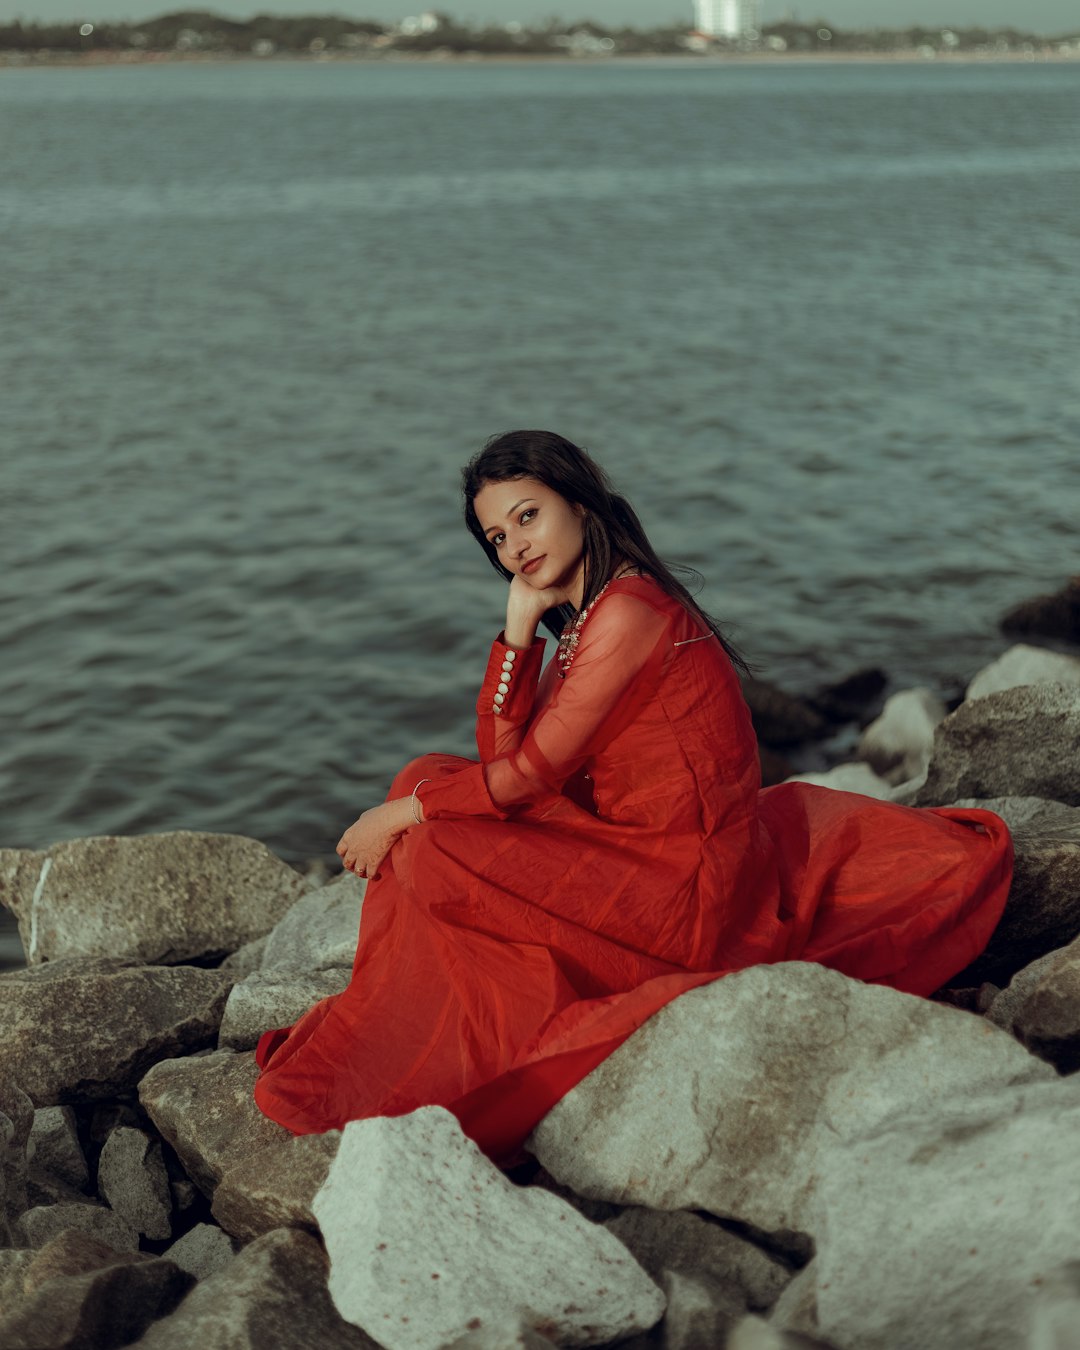 a woman in a red dress sitting on rocks by the water